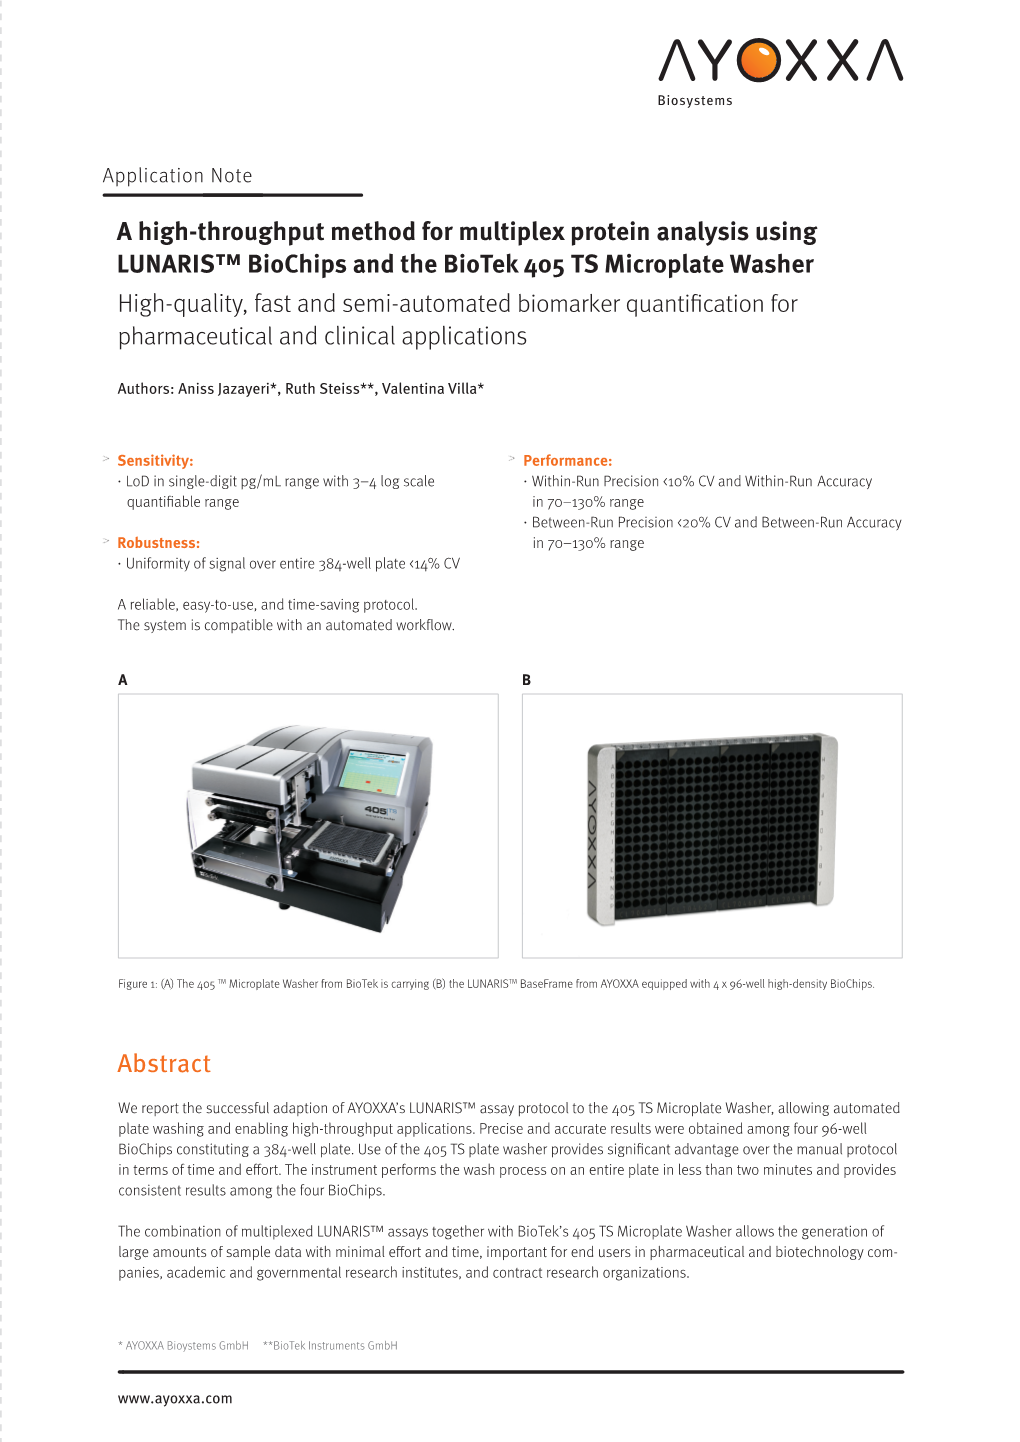 A High-Throughput Method for Multiplex Protein Analysis Using LUNARIS™ Biochips and the Biotek 405 TS Microplate Washer High